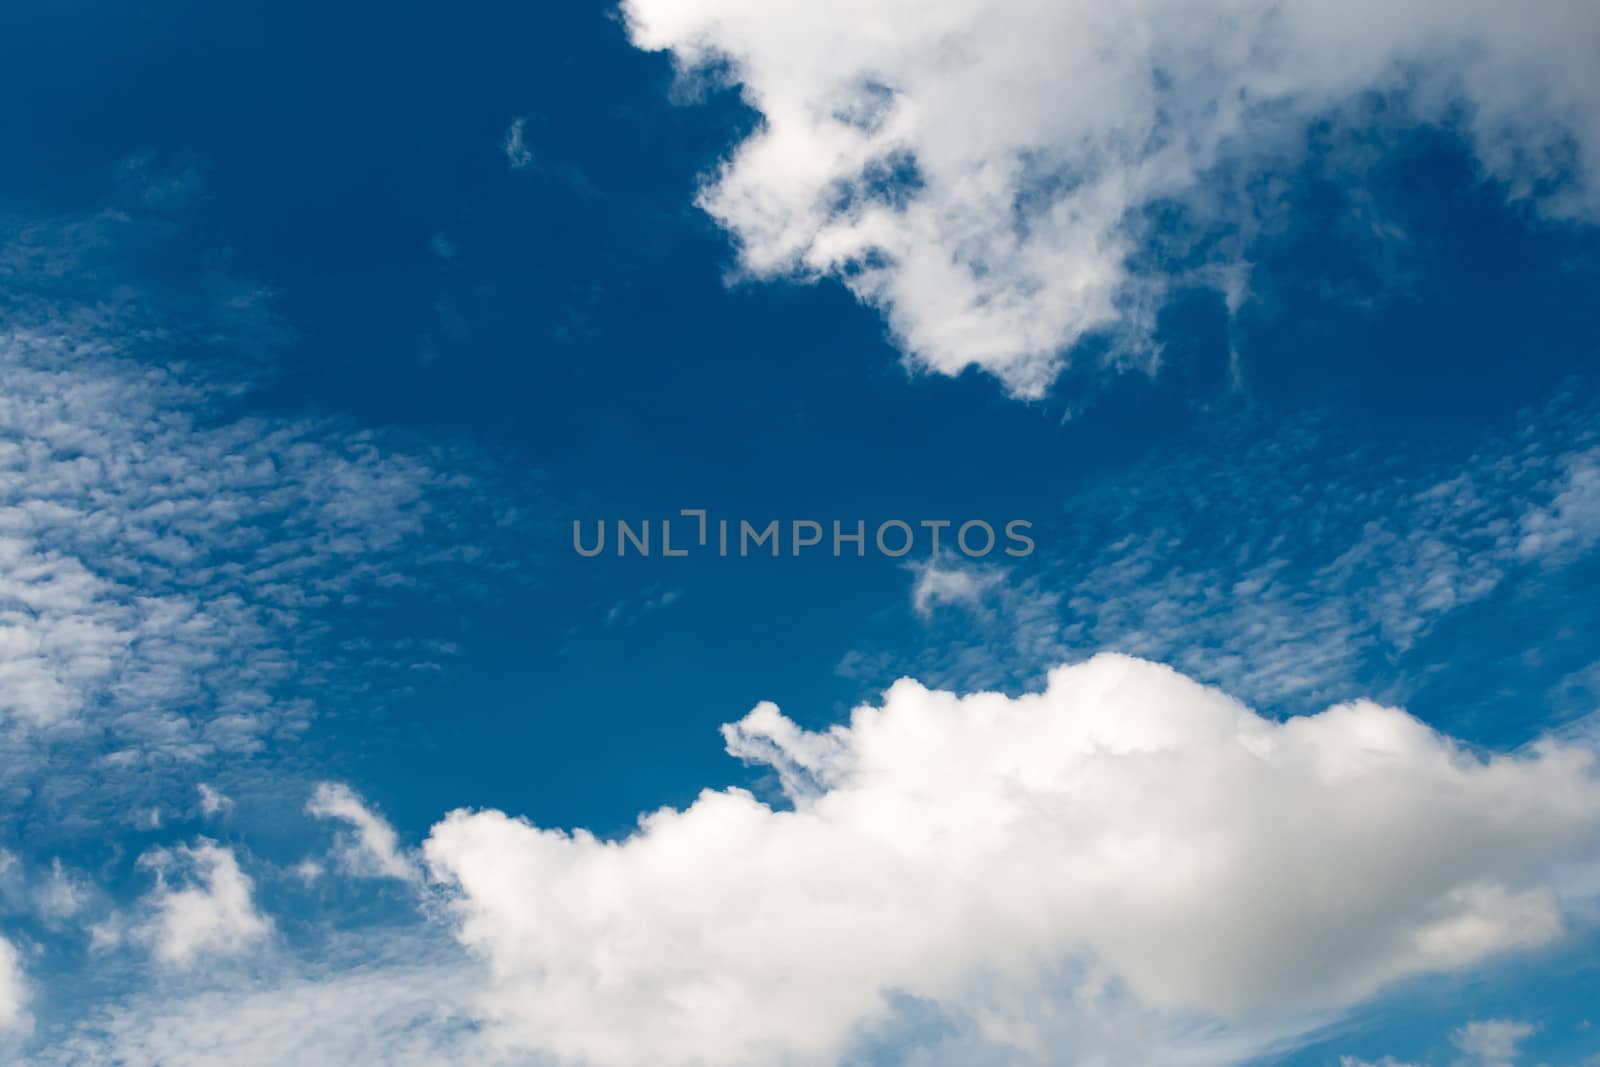 An image of a bright blue sky background